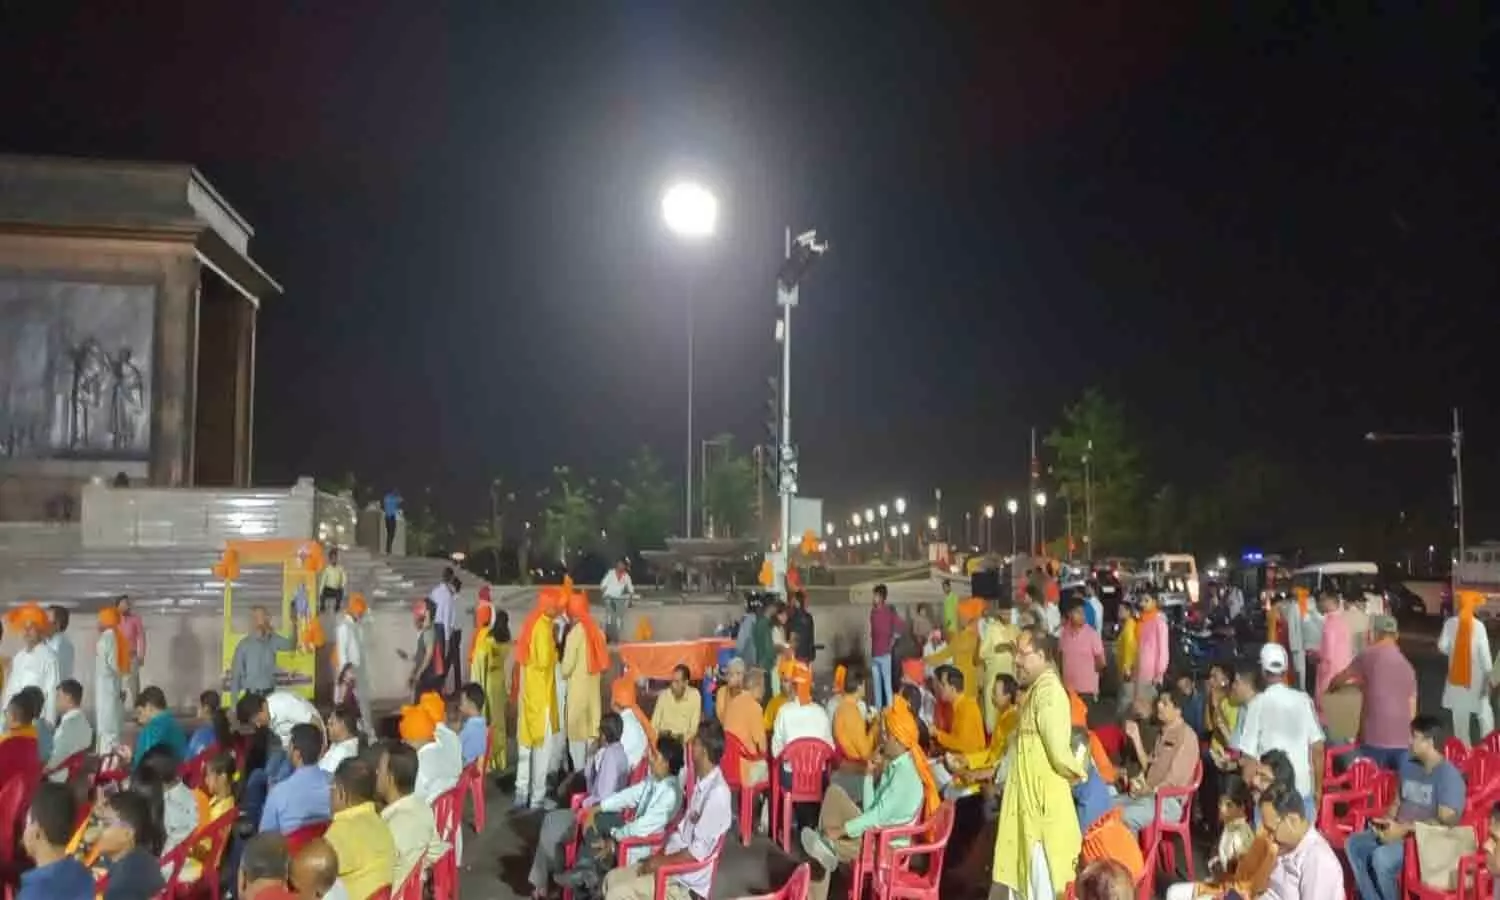 Indian Hindu New Year: Organizing a grand fair on the Indian New Year, Bhajan Sandhya was the main attraction